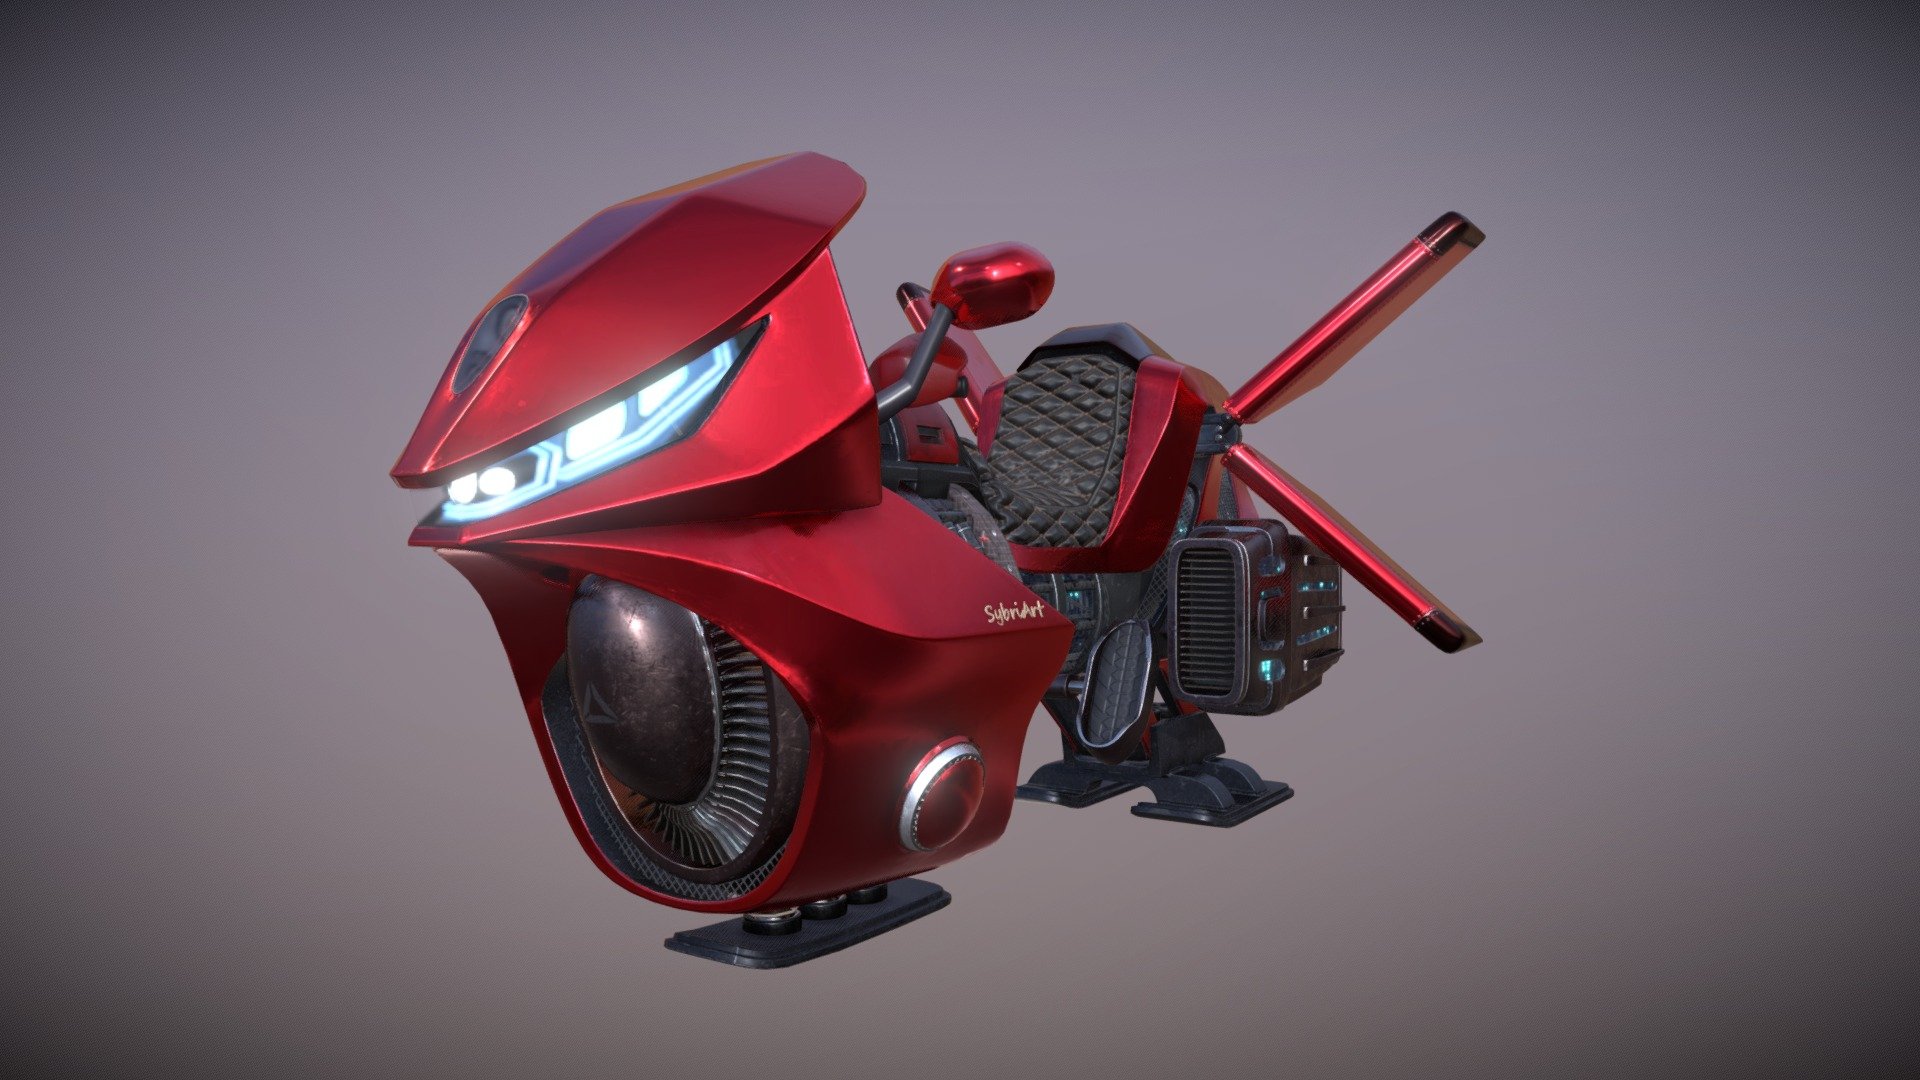 This is my entry for the Scifi motorcycle challenge. 

The motorcycle was modeled in Blender 2.82, painted with Substance Painter with some textures made with Affinity Designer/Photo. 

Artstation: https://www.artstation.com/sybriart

Instagram: https://www.instagram.com/sybriart/ - Sci-fi Motorcycle - 3D model by Sybren Westendorp (@sybriart) 3d model